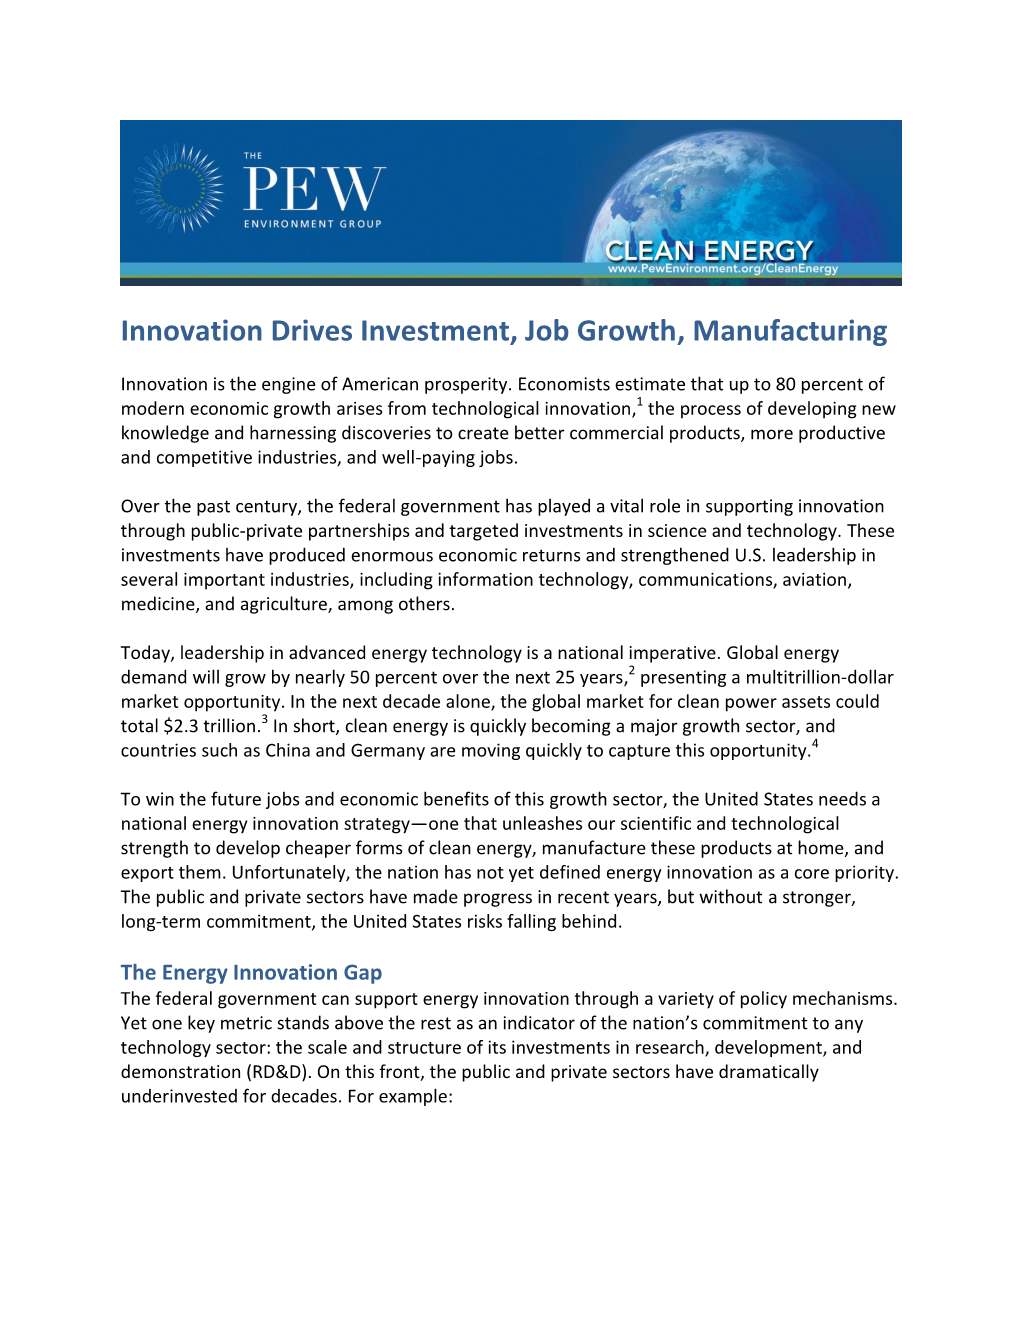 Clean Energy Innovation Drives Investment, Job Growth and Manufacturing